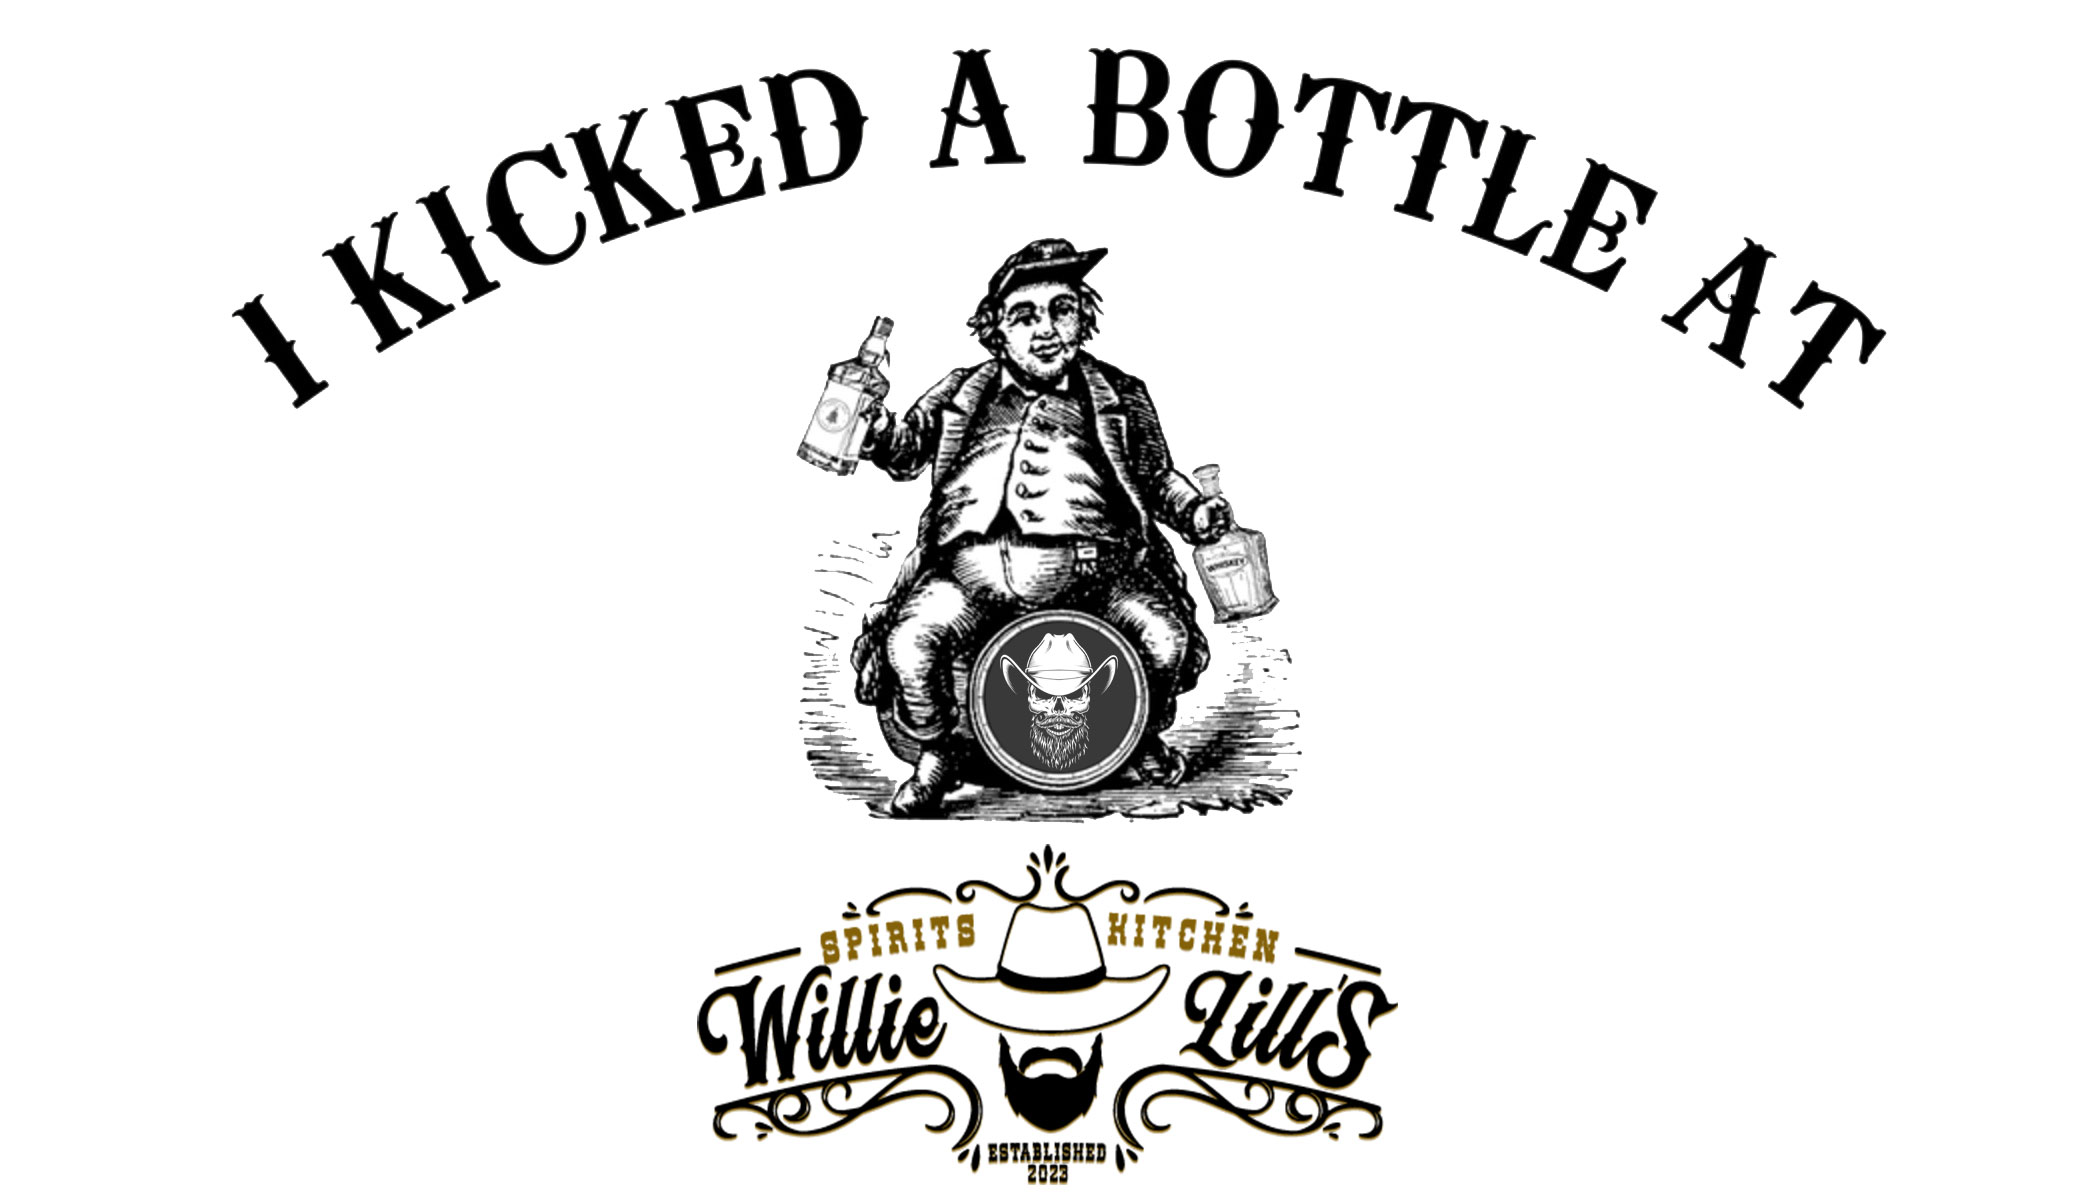 I Kicked a Bottle at Willie Lill's